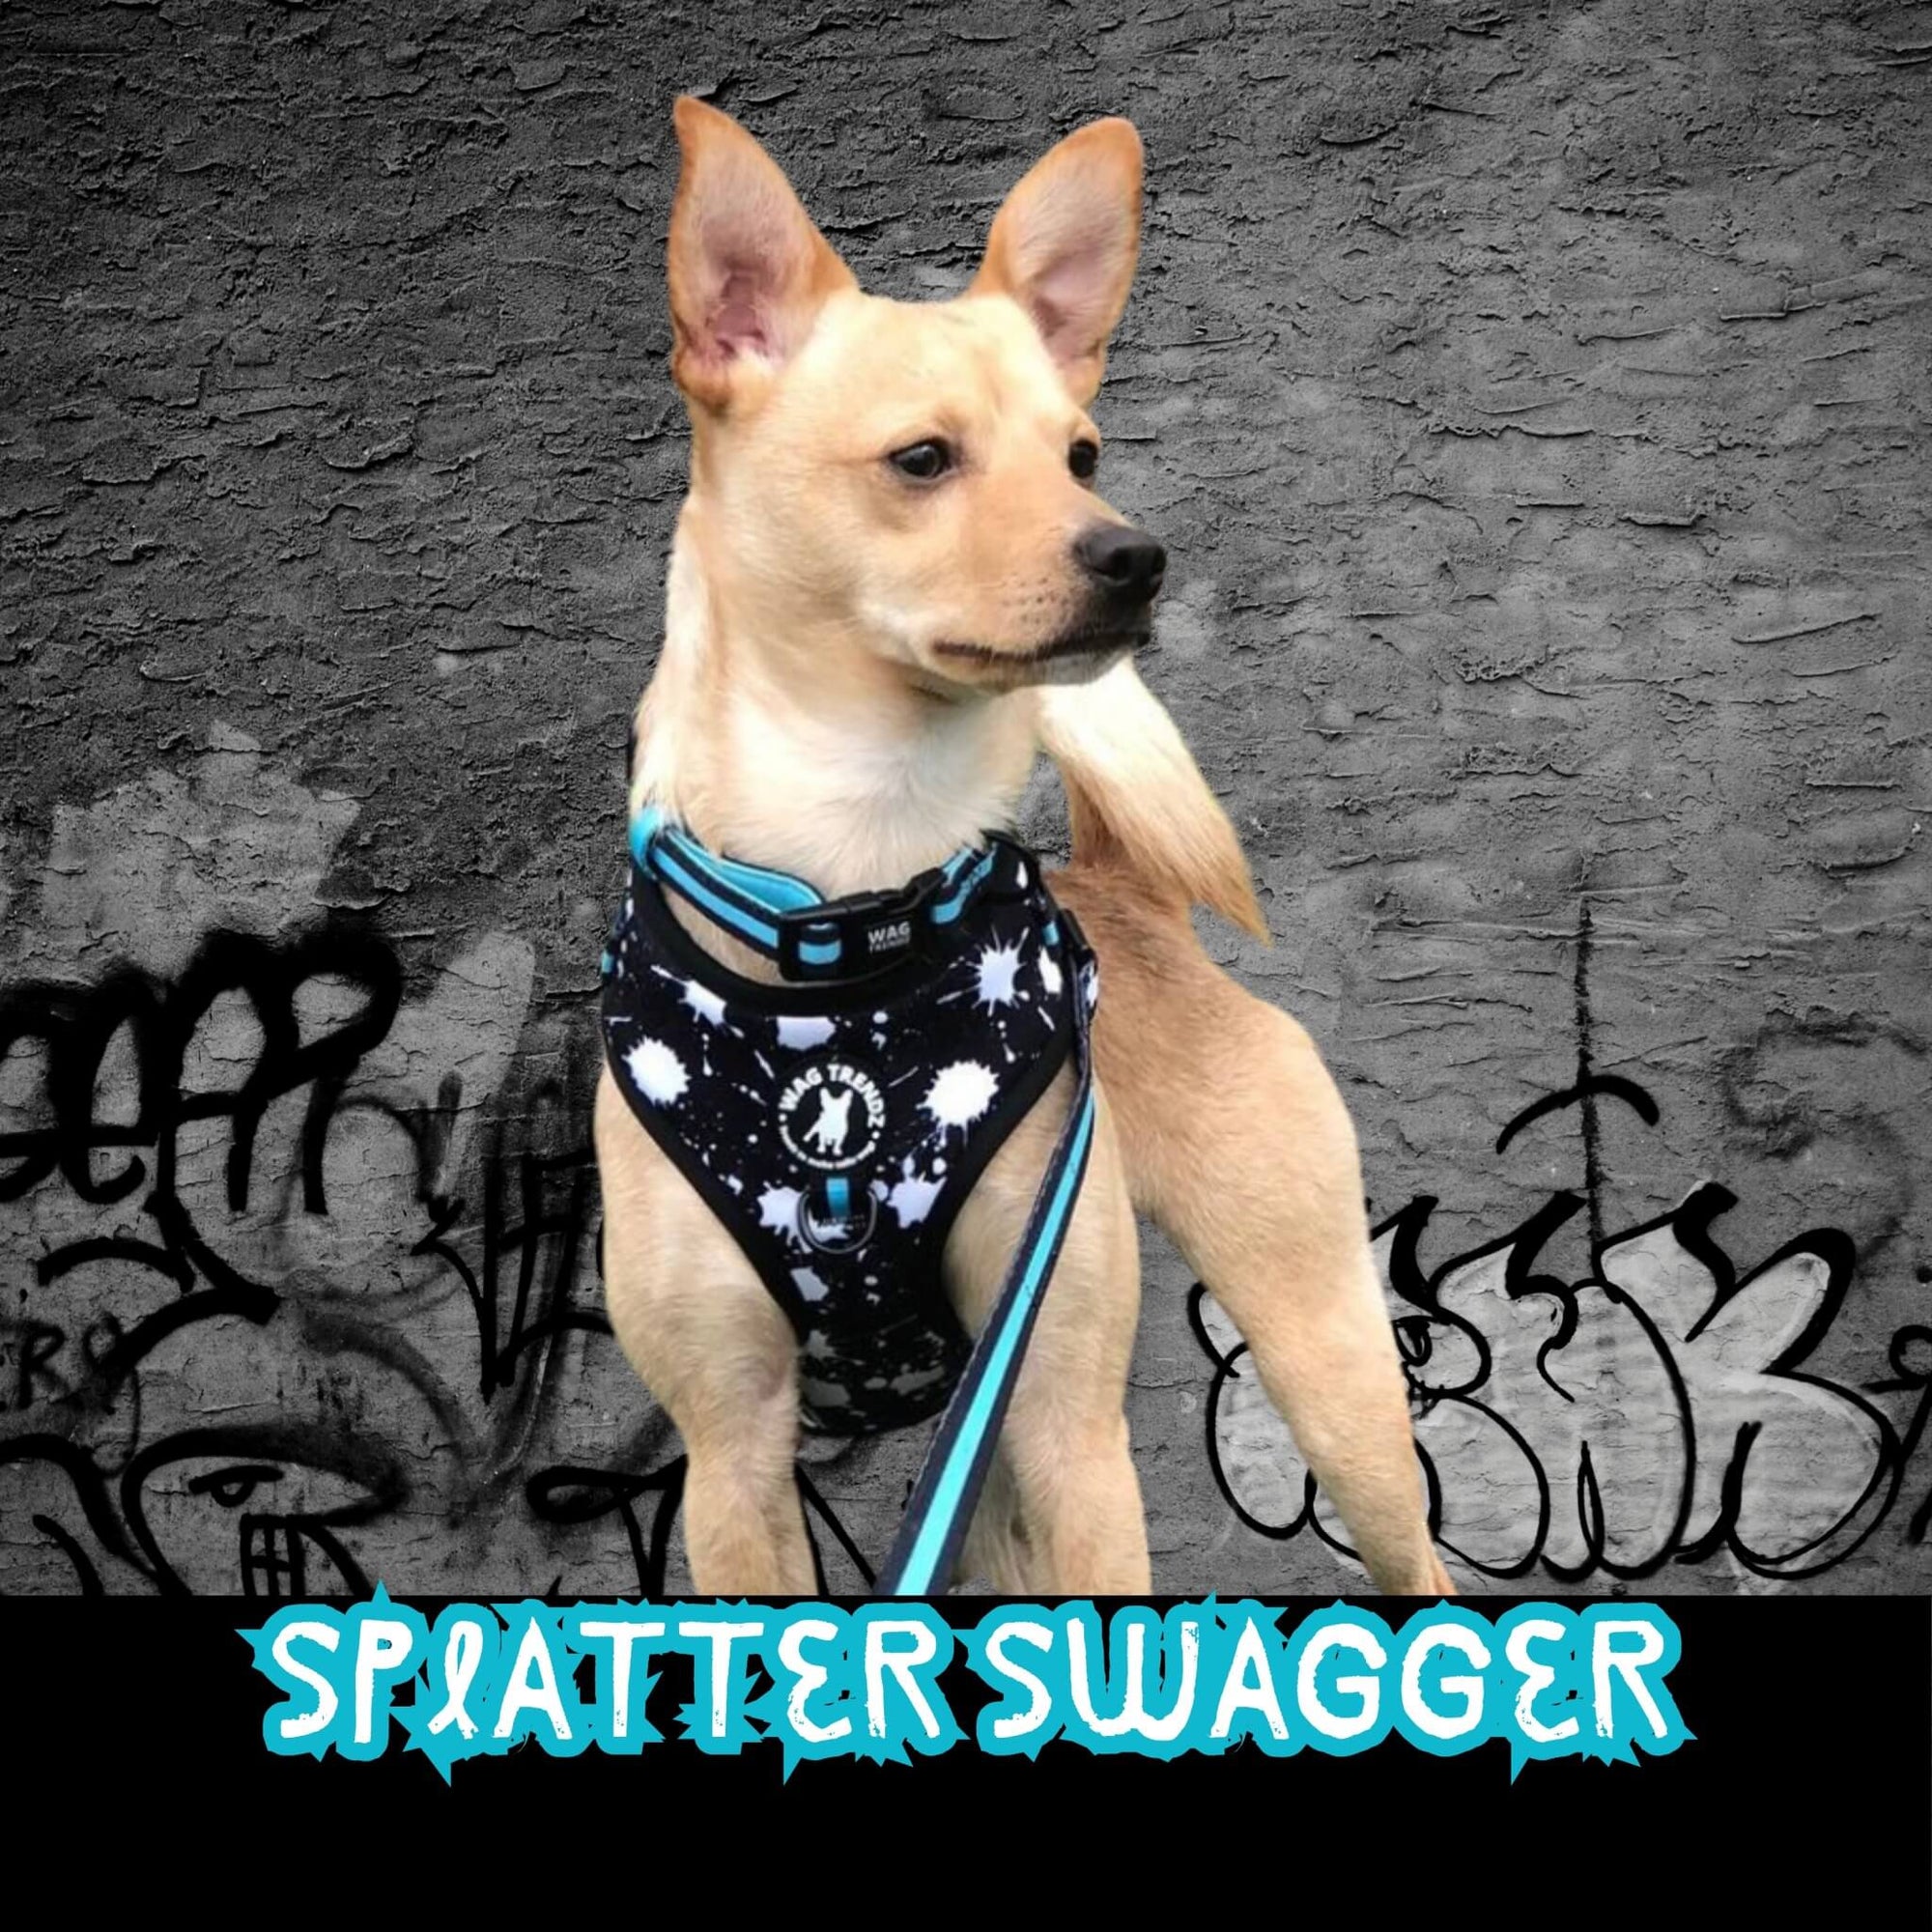 No Pull Dog Harness in Splatter Swagger worn by Chihuahua against black and gray graffiti wall